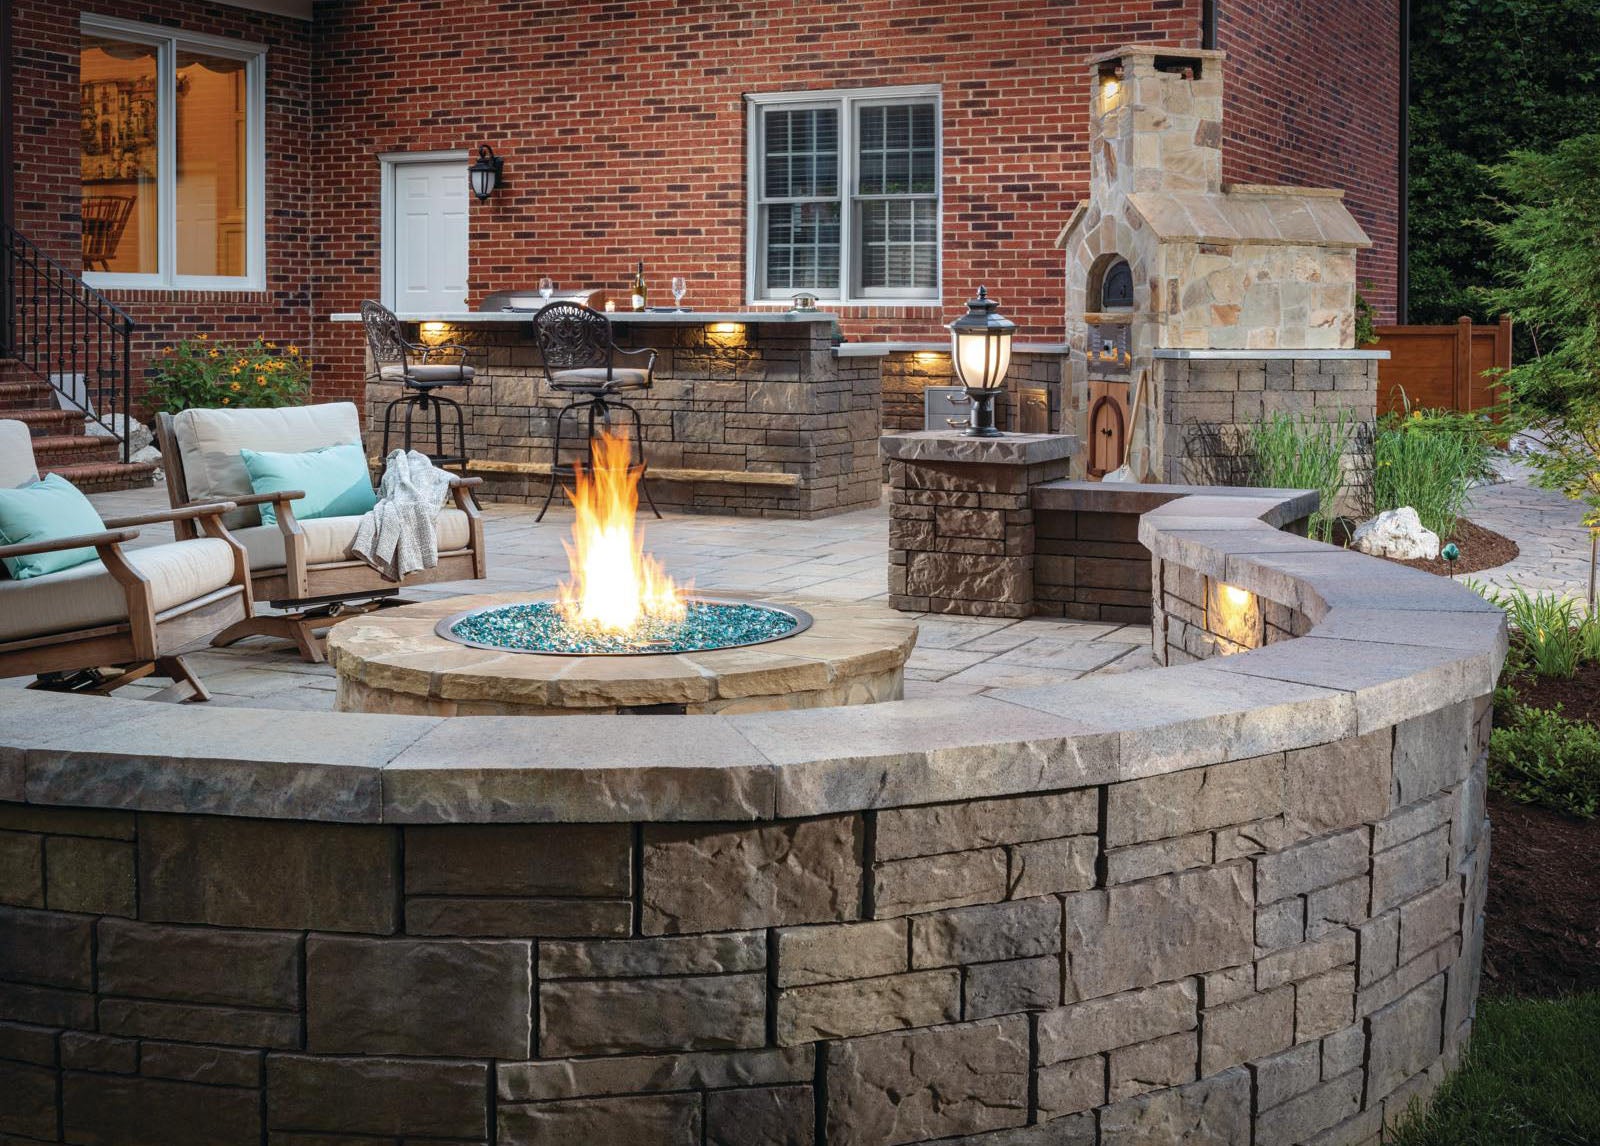 Turn a firepit into a focal point